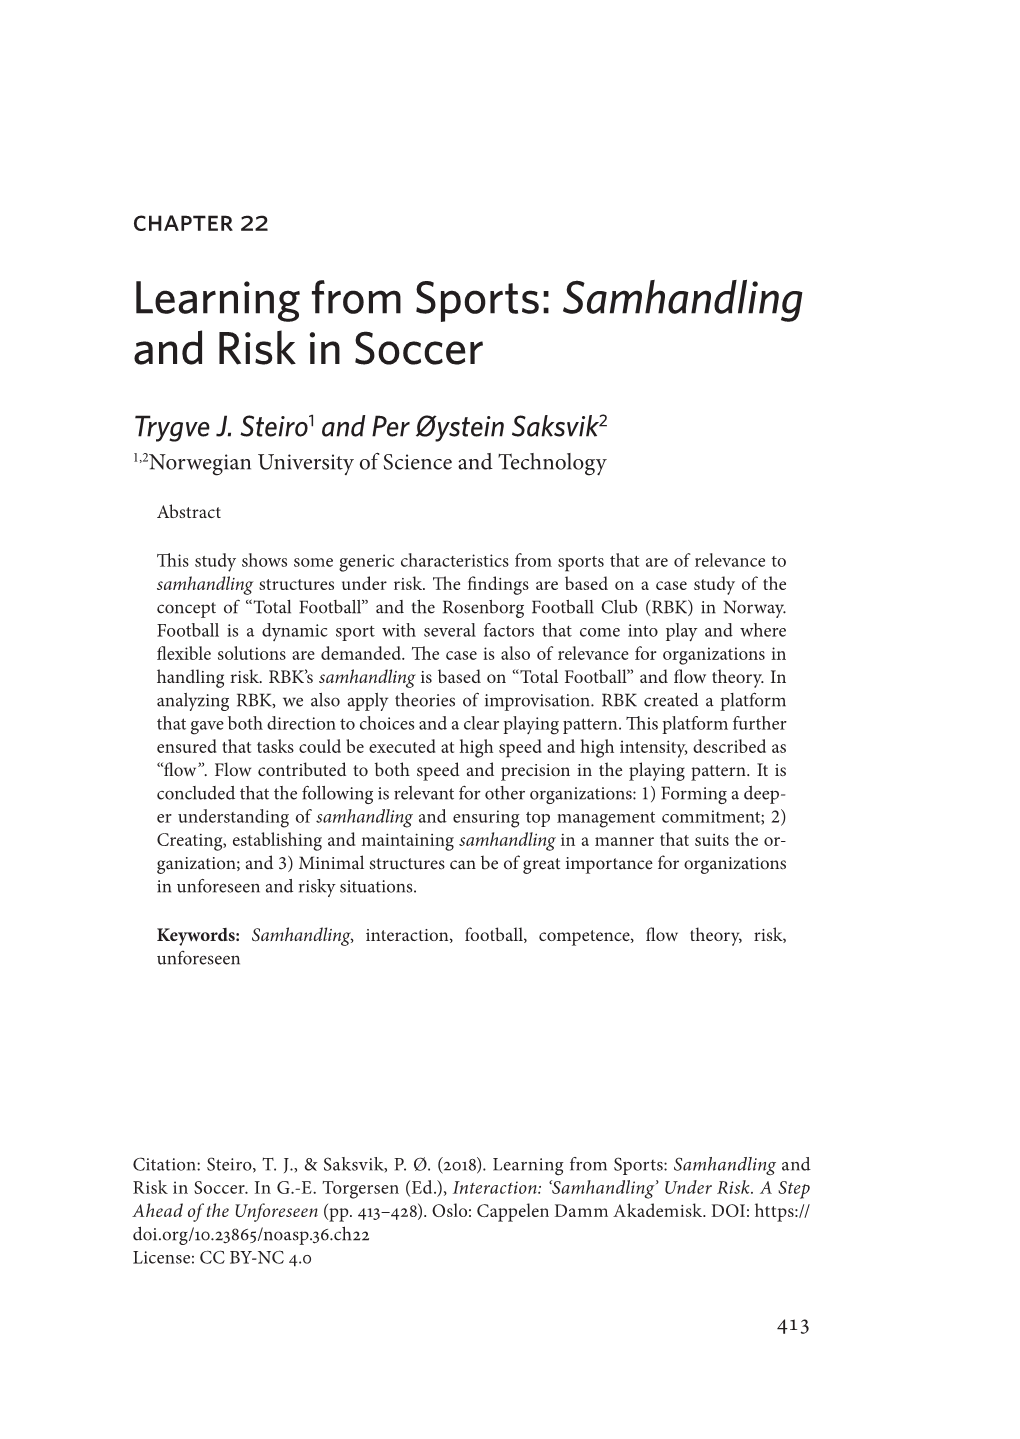 Learning from Sports: Samhandling and Risk in Soccer